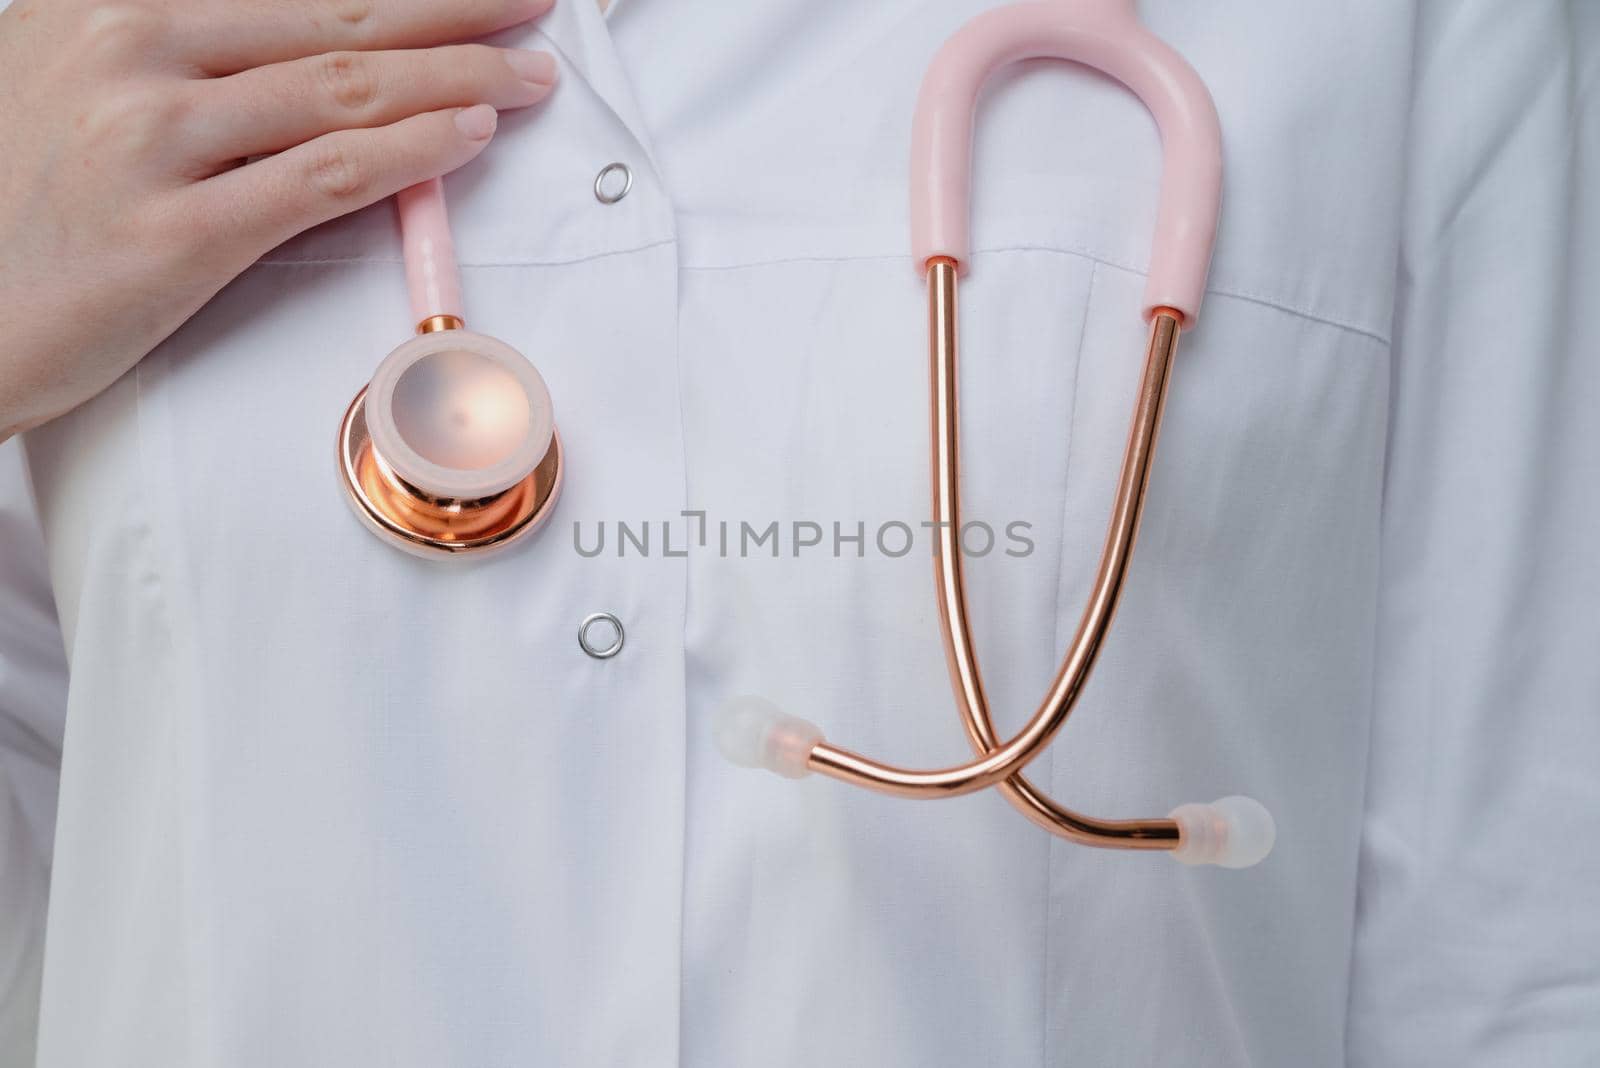 Pink medical stethoscope.A doctor with a stethoscope.A doctor holding a stethoscope.The concept of healthcare.